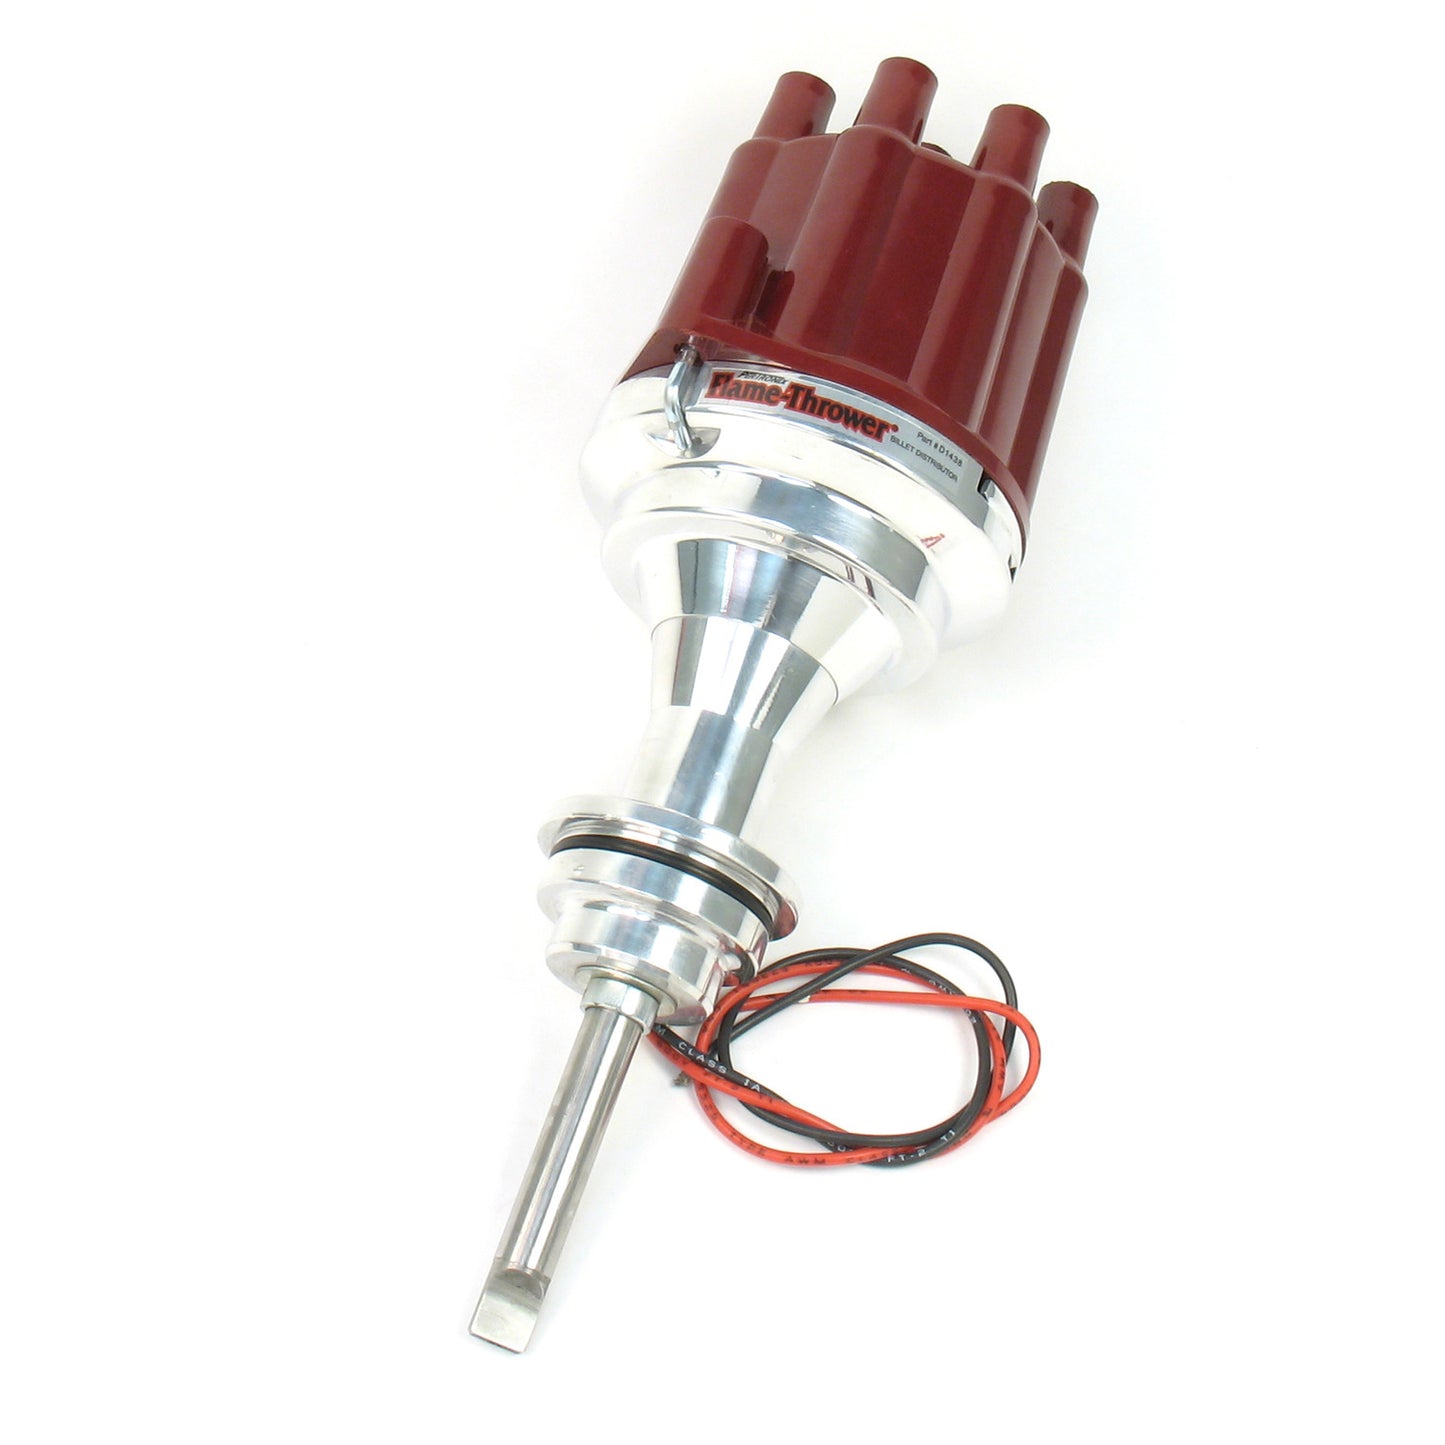 PerTronix D143801 Flame-Thrower Electronic Distributor Billet Chrysler/Dodge/Plymouth 426-440 Plug and Play with Ignitor II Technology Non Vacuum Advance Red Cap